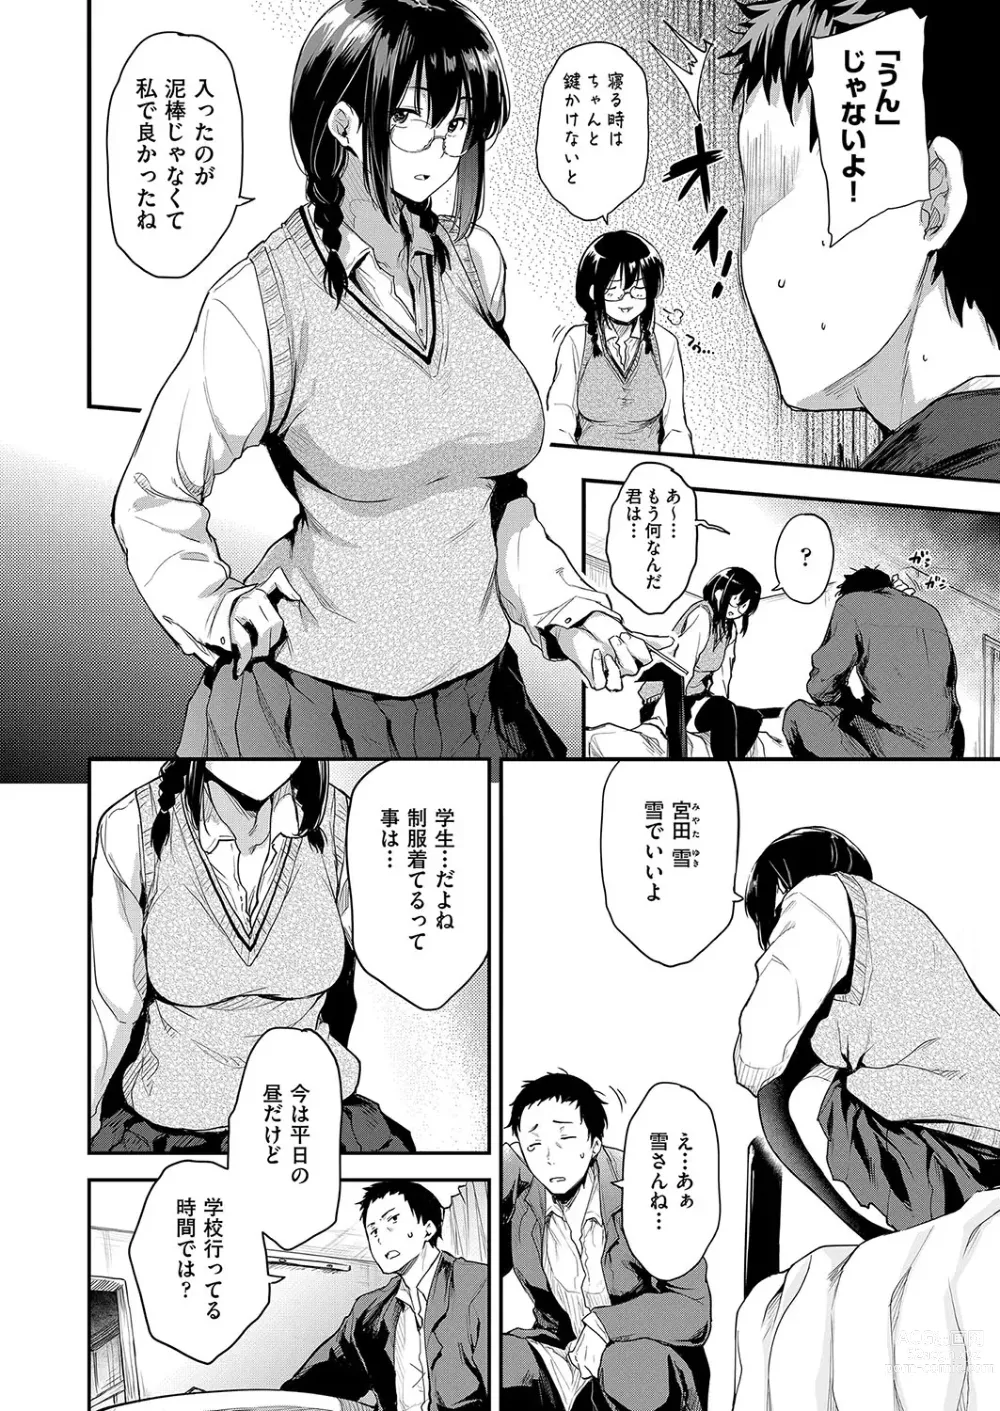 Page 13 of manga Chichi to Megane to Etc - Boobs, glasses and etc...